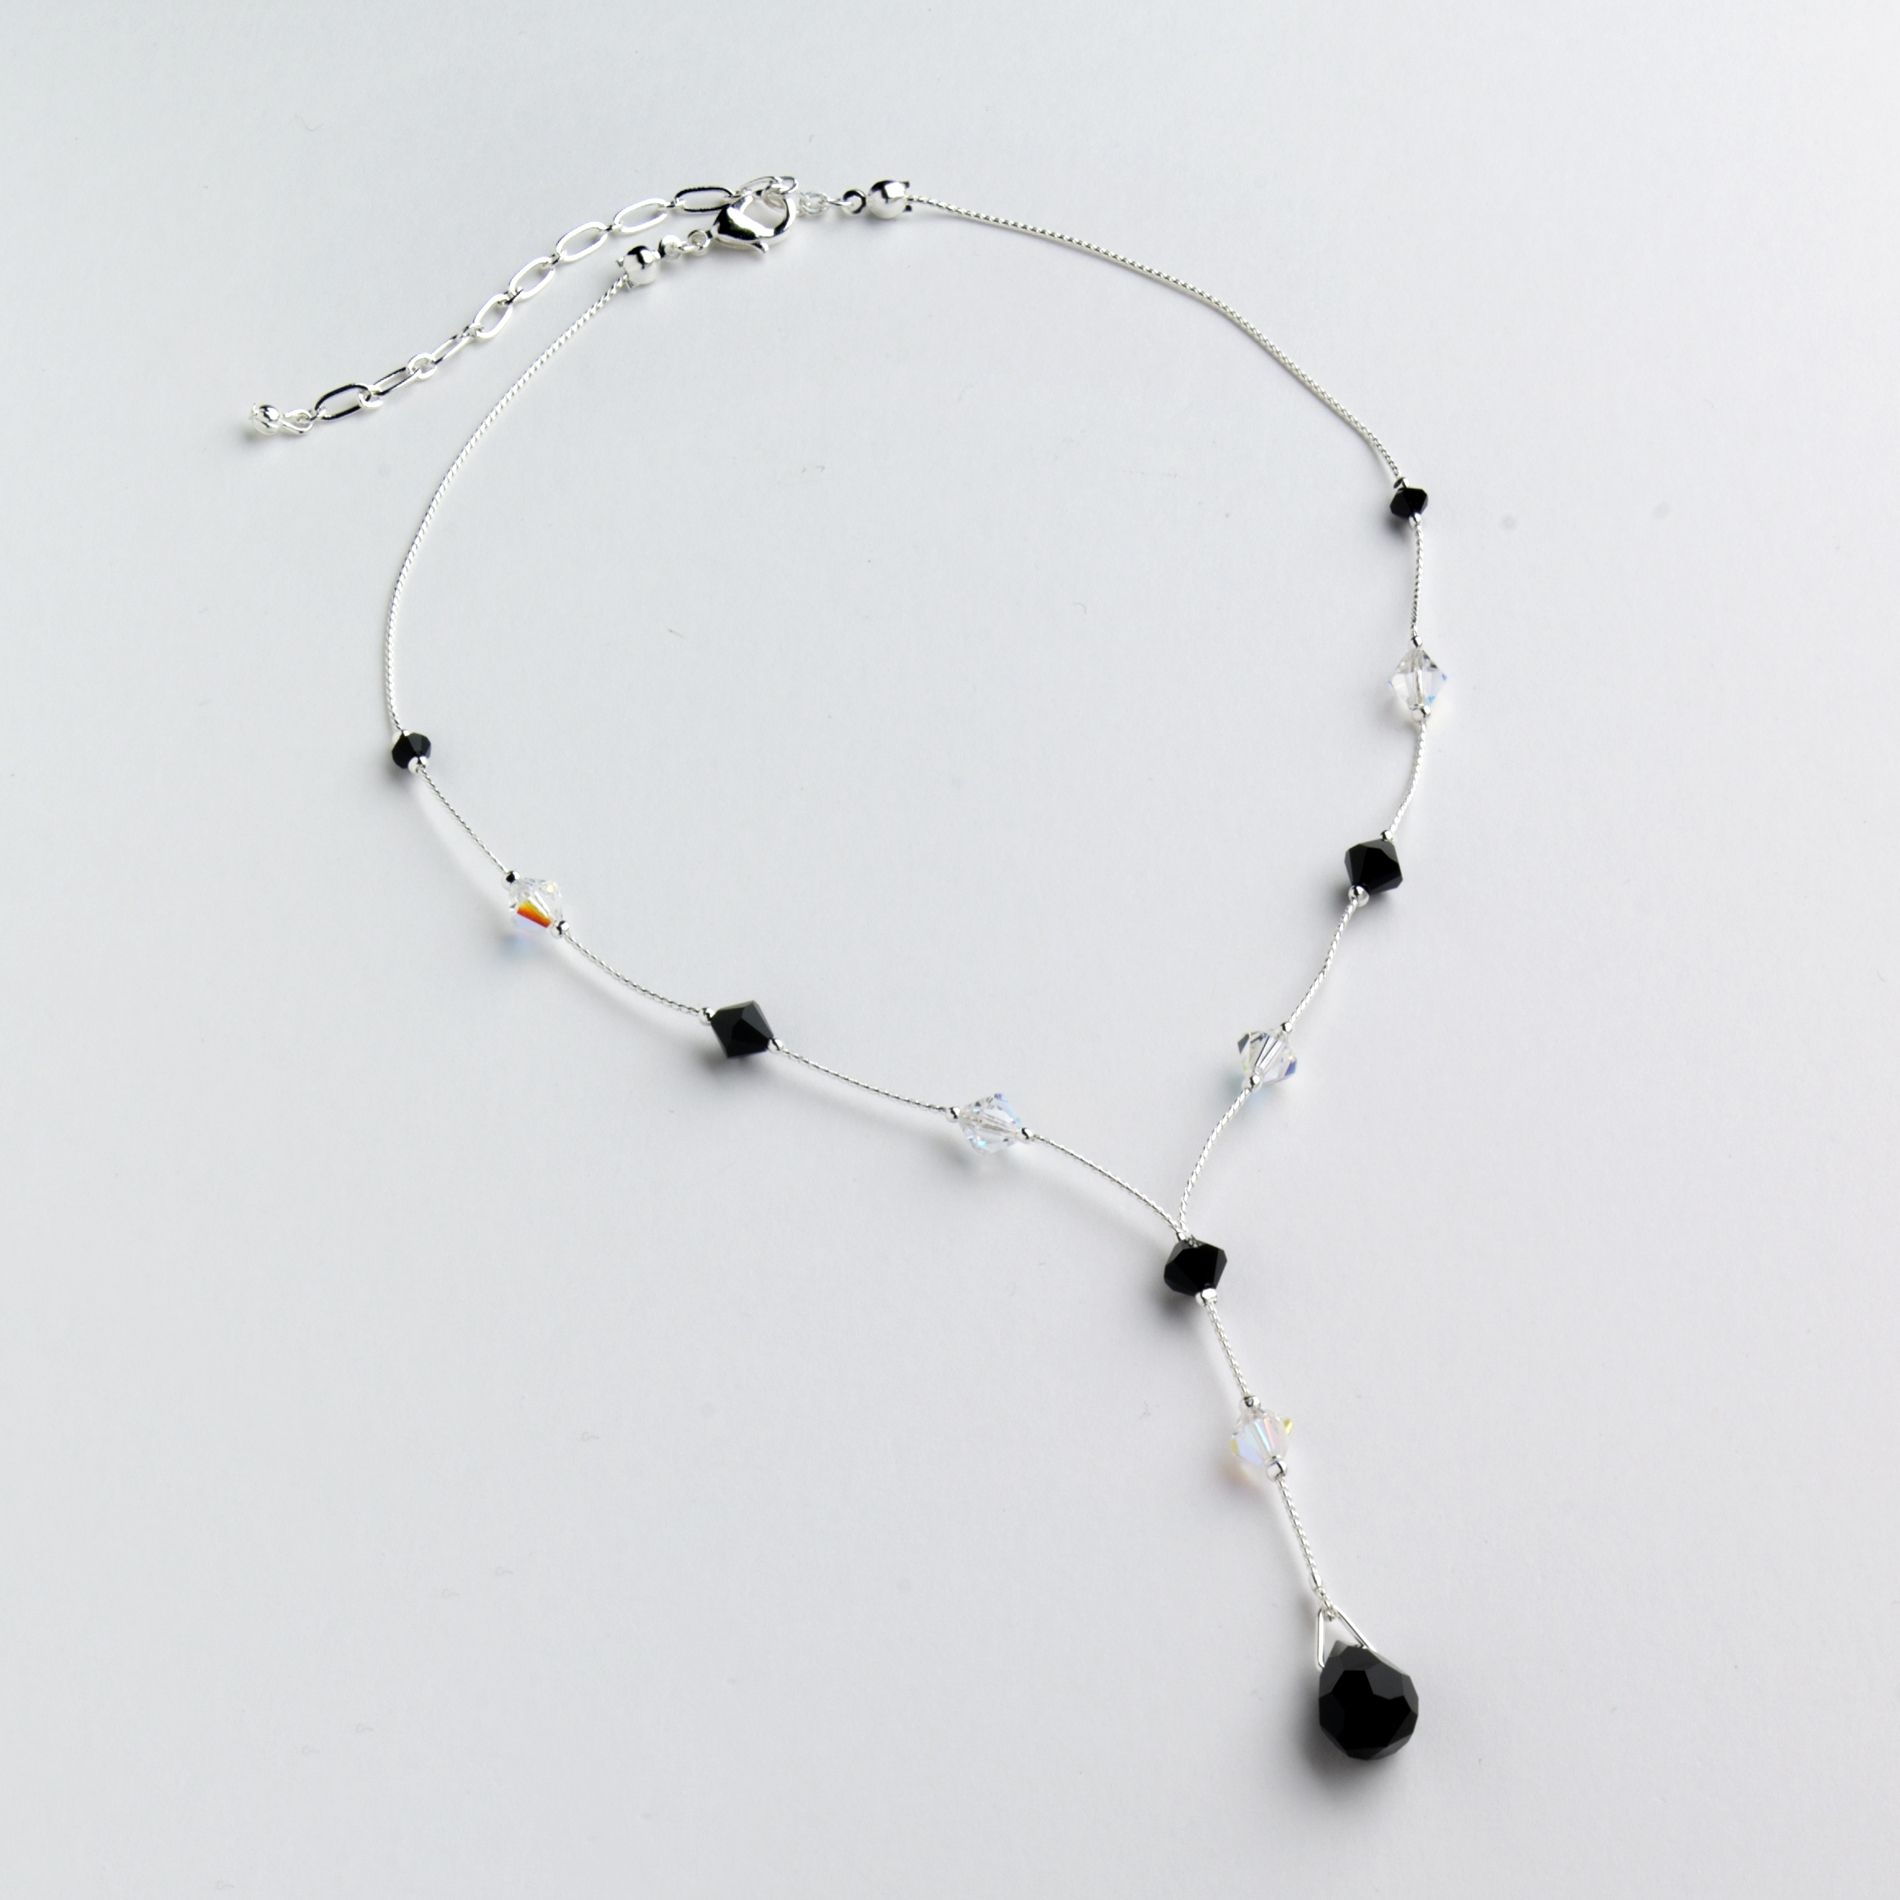 Metaphor Necklace, Chain with Bead Stations, Y Neck